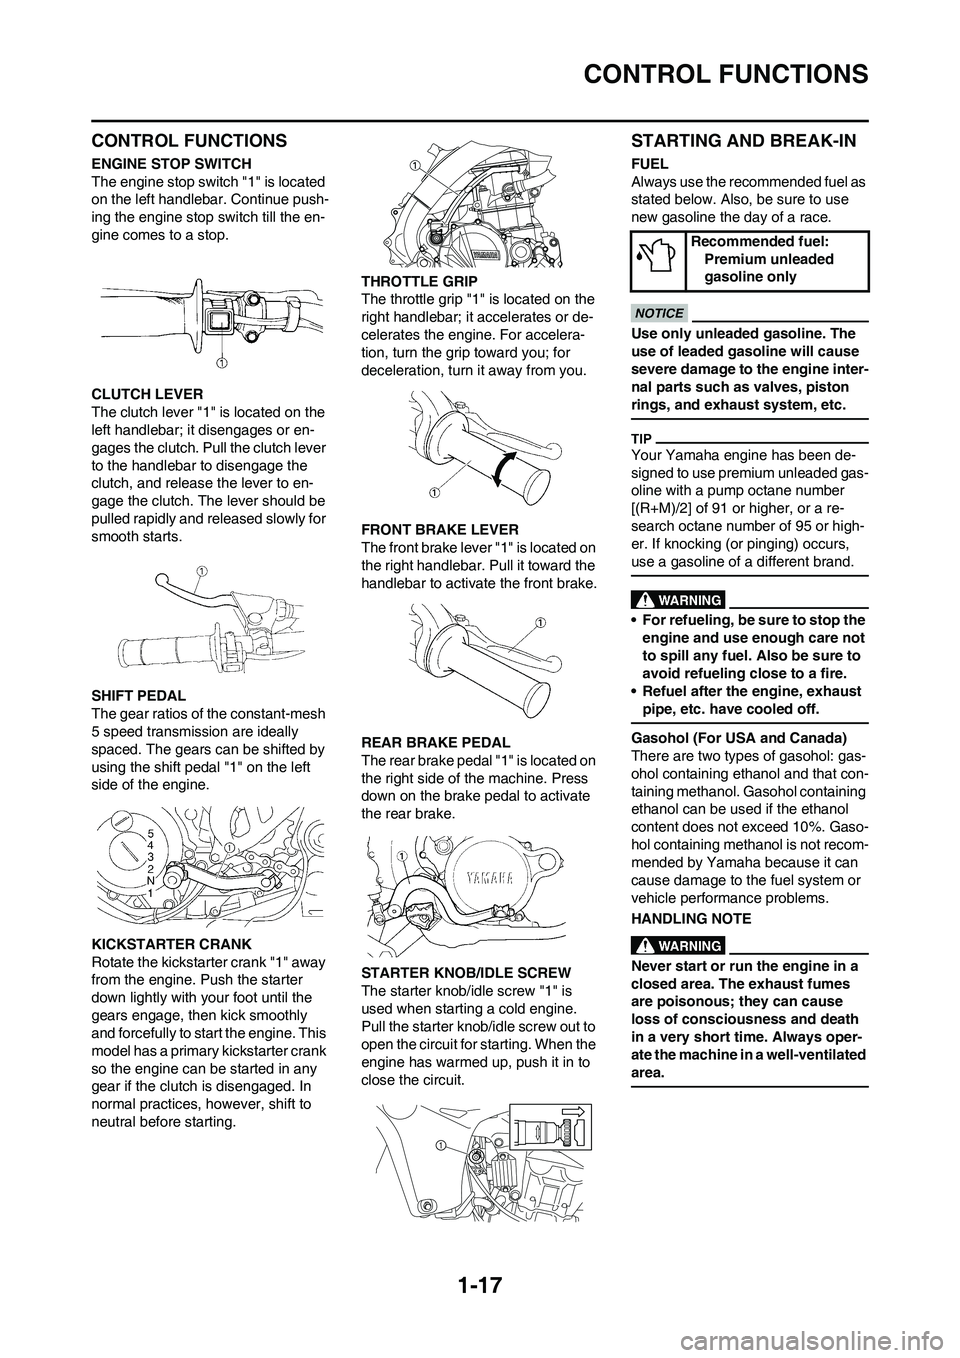 YAMAHA YZ450F 2010  Owners Manual 1-17
CONTROL FUNCTIONS
CONTROL FUNCTIONS
ENGINE STOP SWITCH
The engine stop switch "1" is located 
on the left handlebar. Continue push-
ing the engine stop switch till the en-
gine comes to a stop.
C